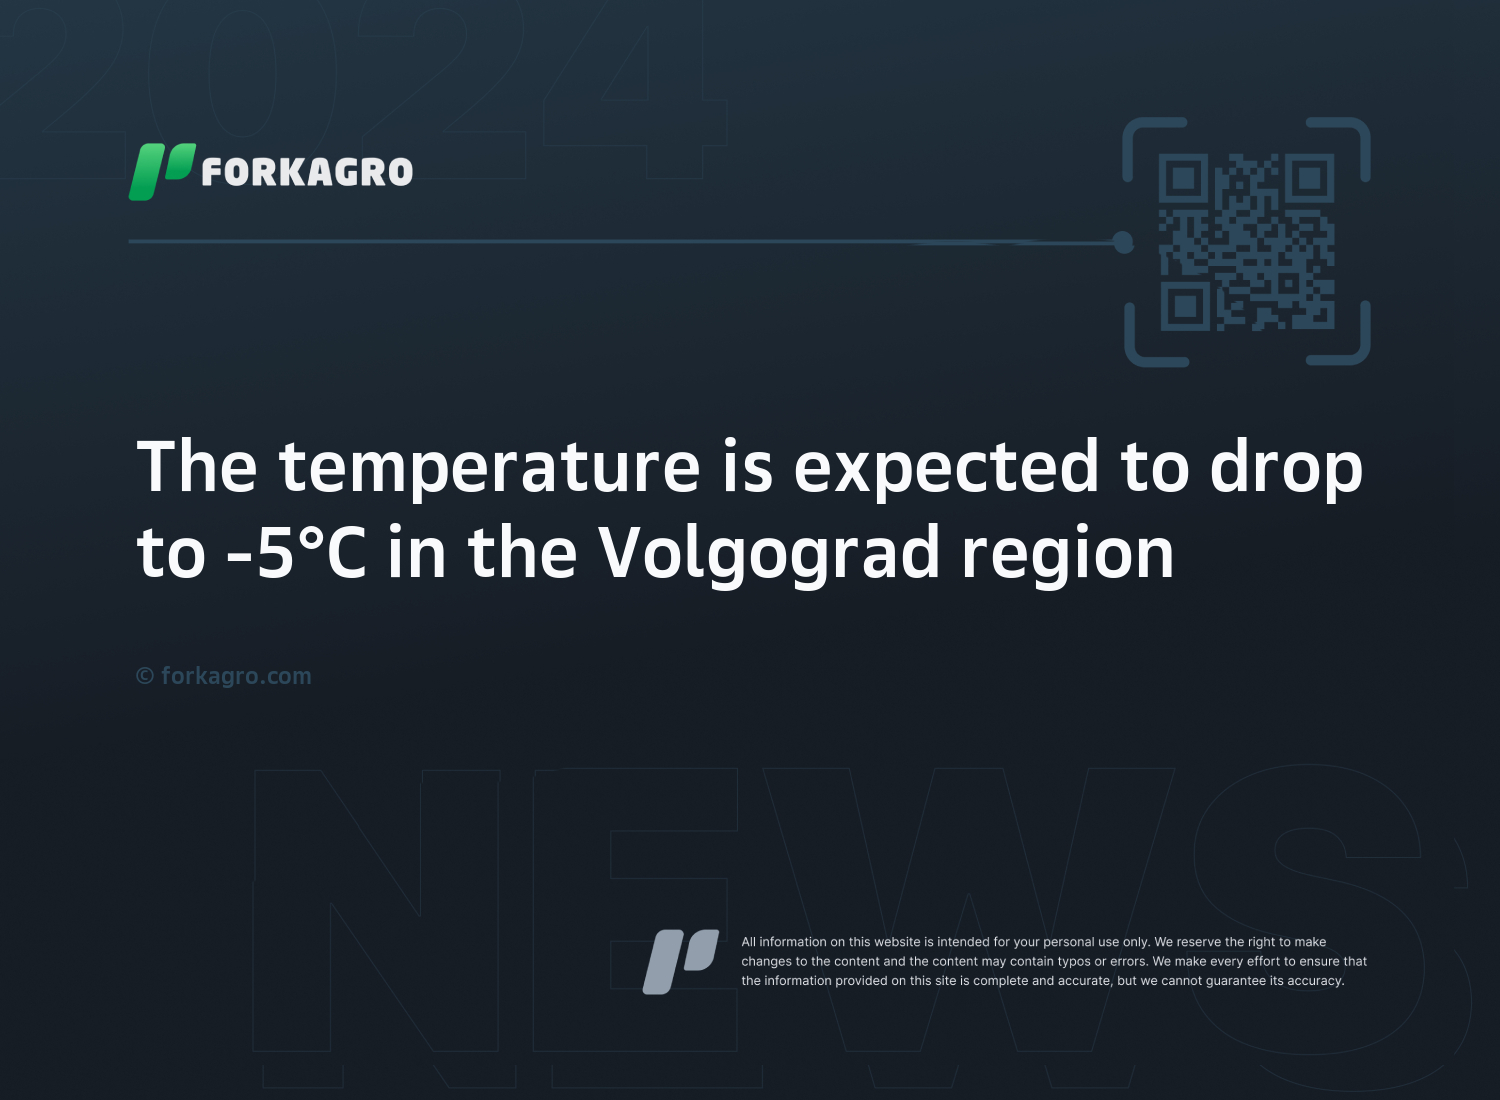 The temperature is expected to drop to -5°C in the Volgograd region